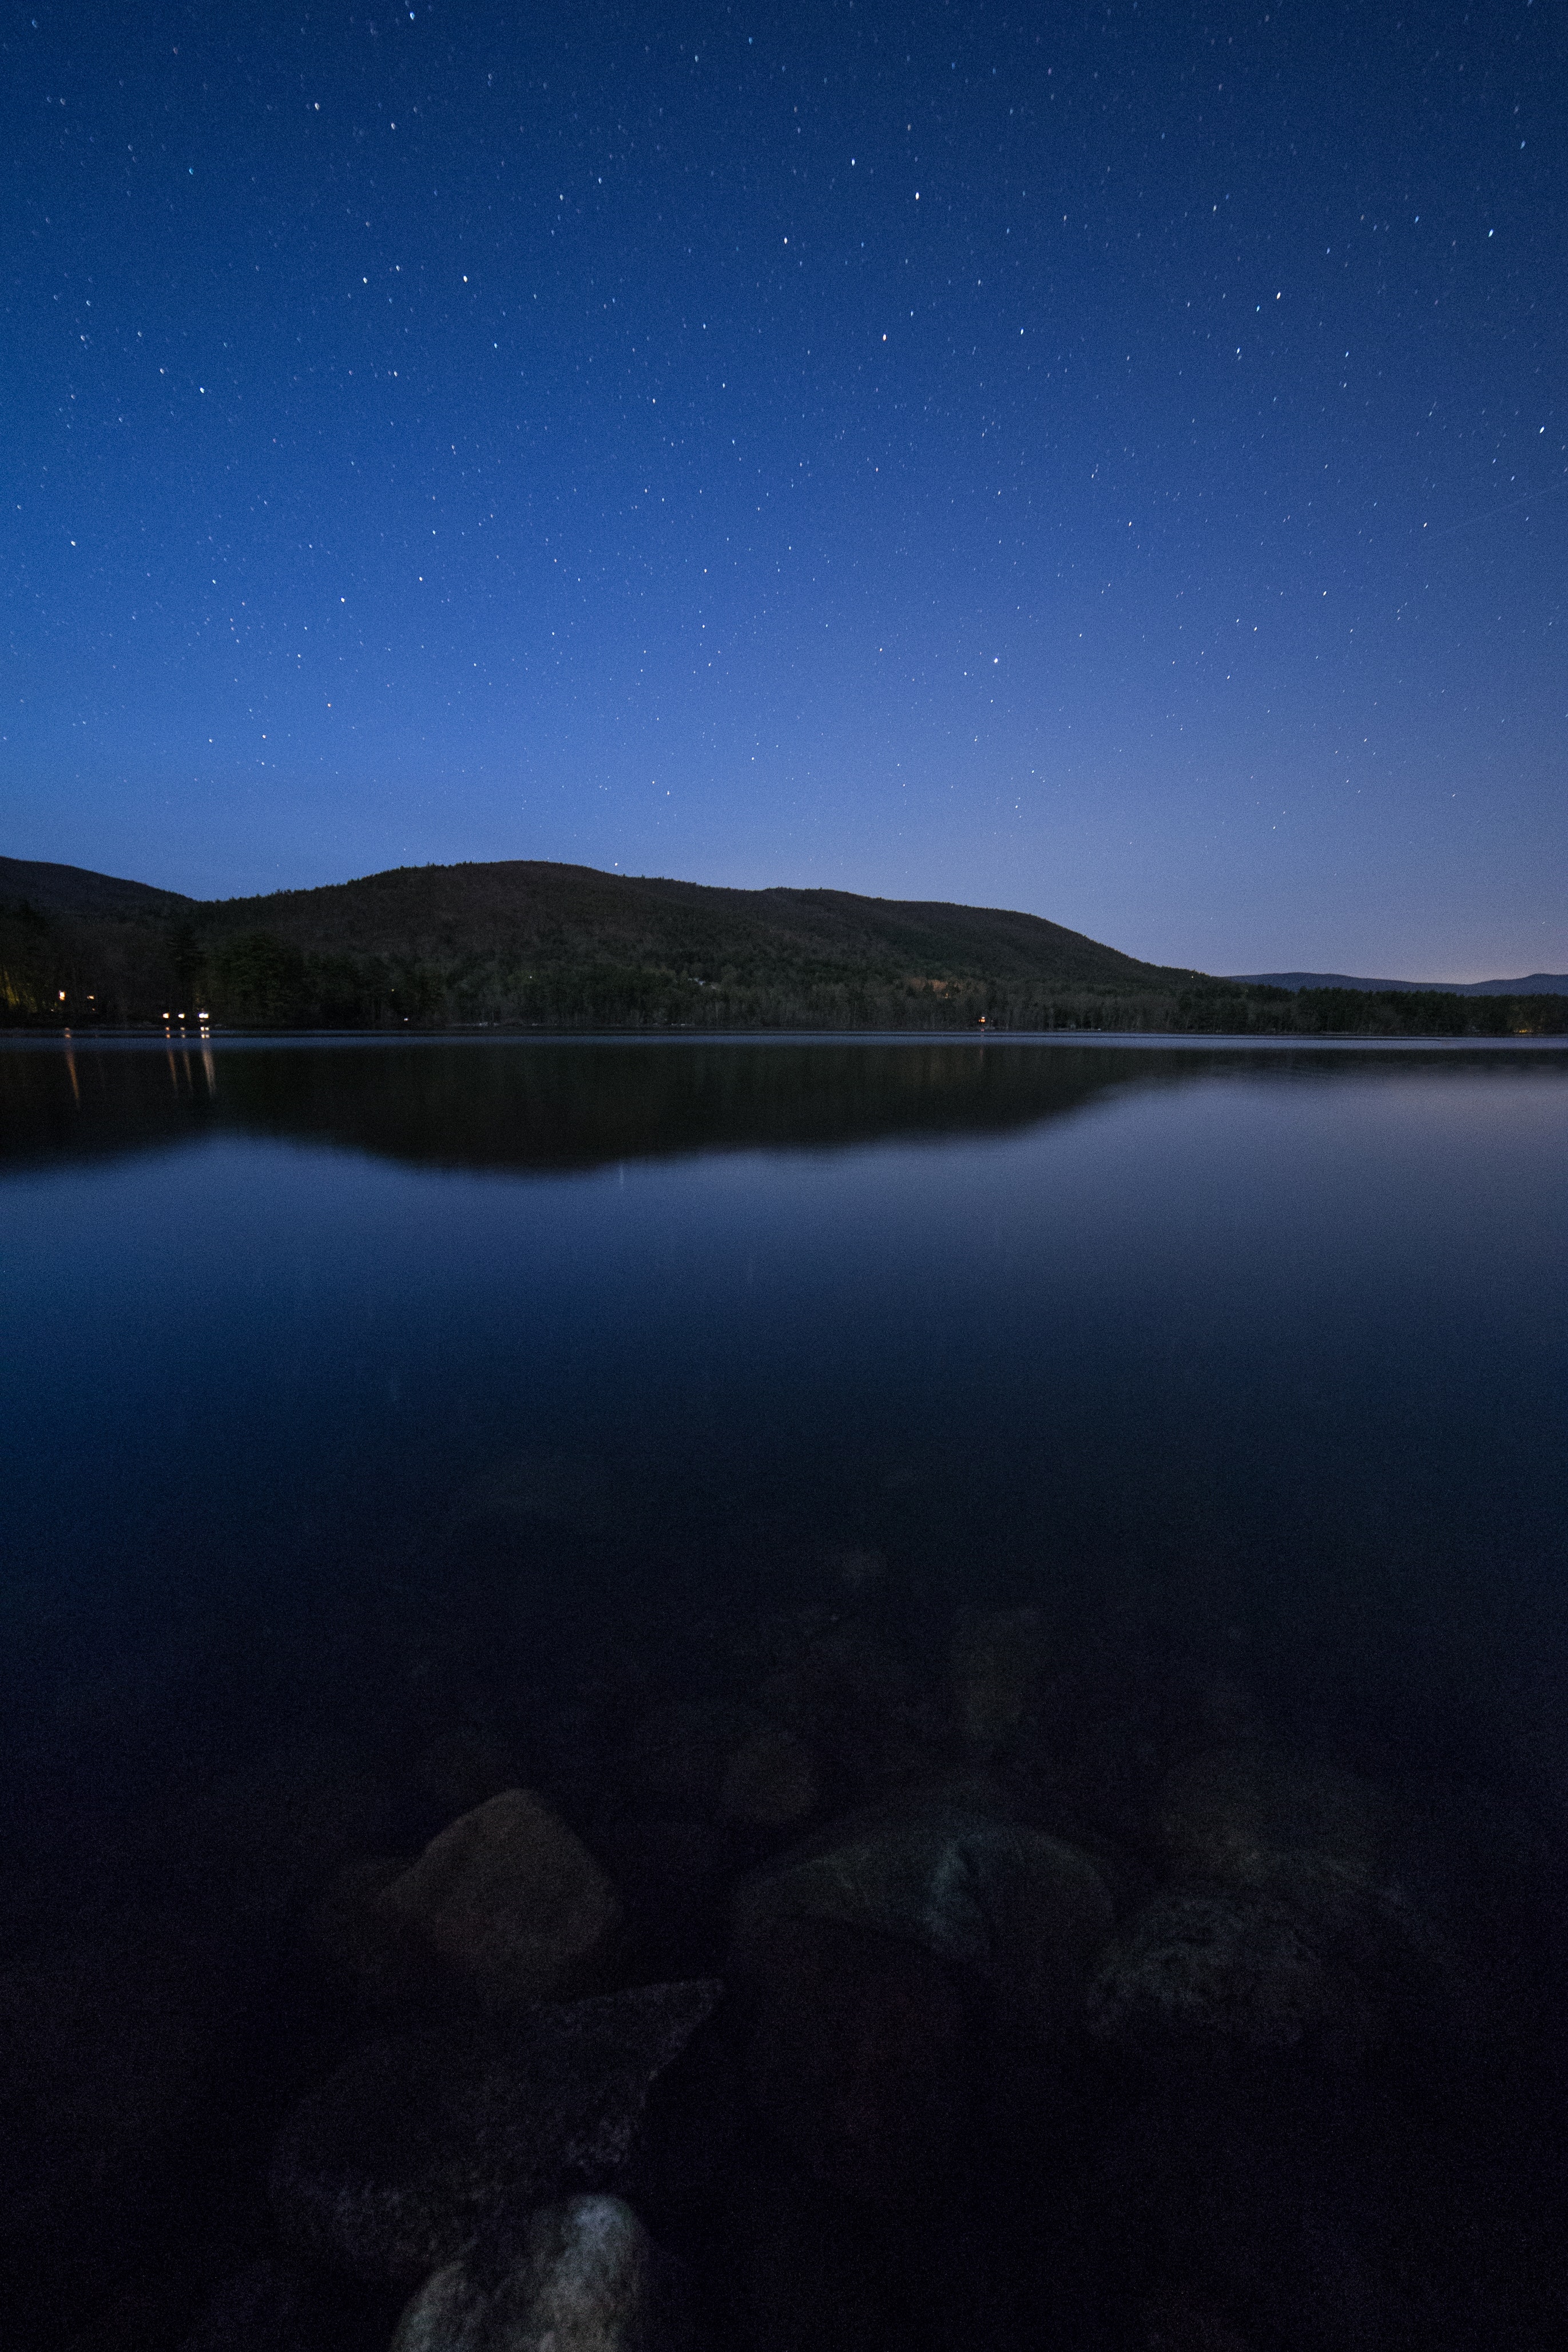 Lake View Under Clear Blue Night Sky during Night Time, Dusk, Lake, Landscape, Mountain, HQ Photo